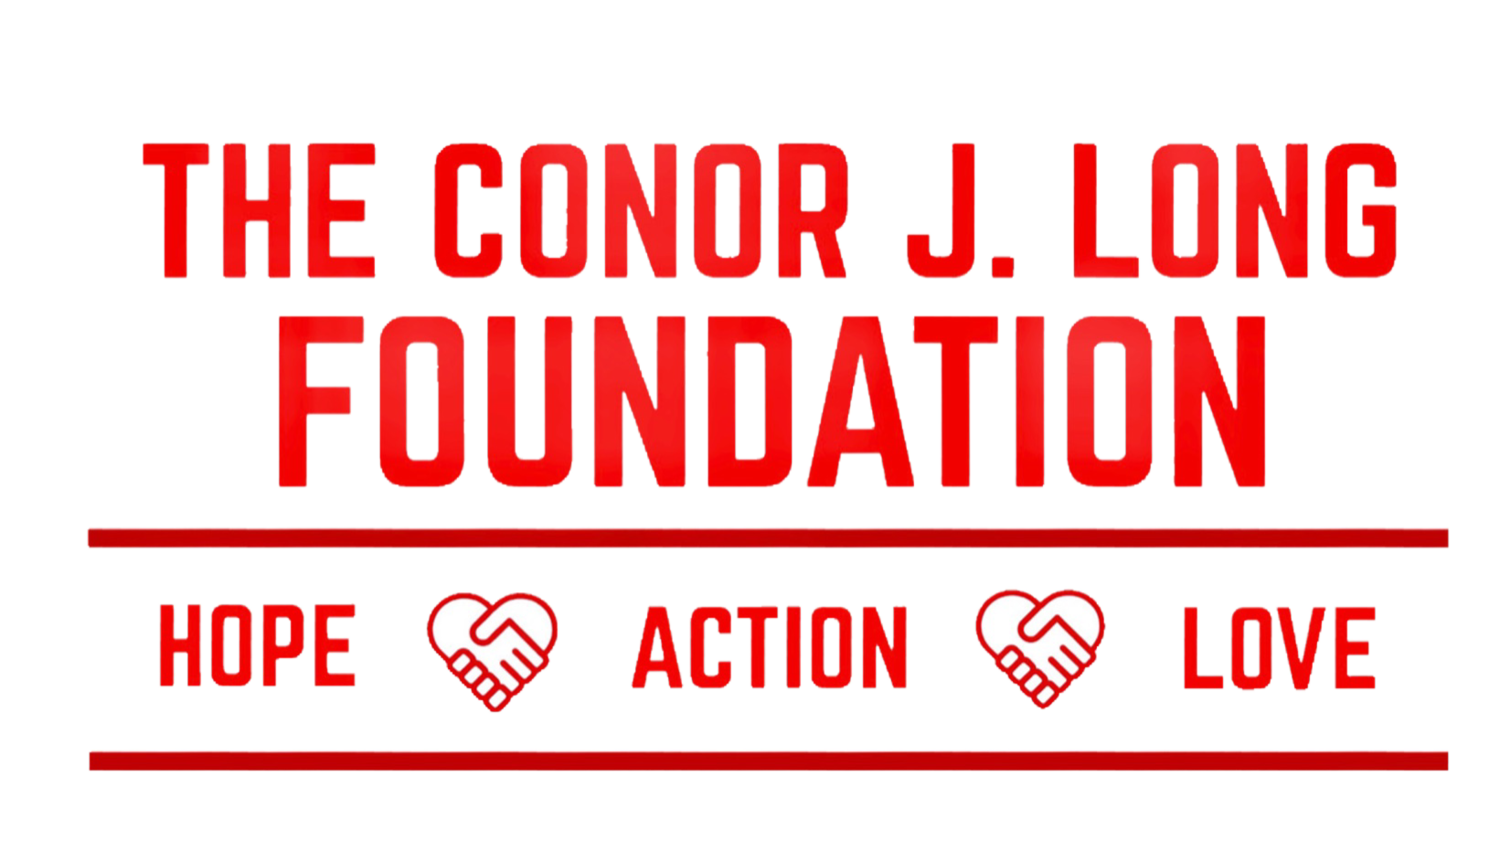 The Conor J. Long Foundation